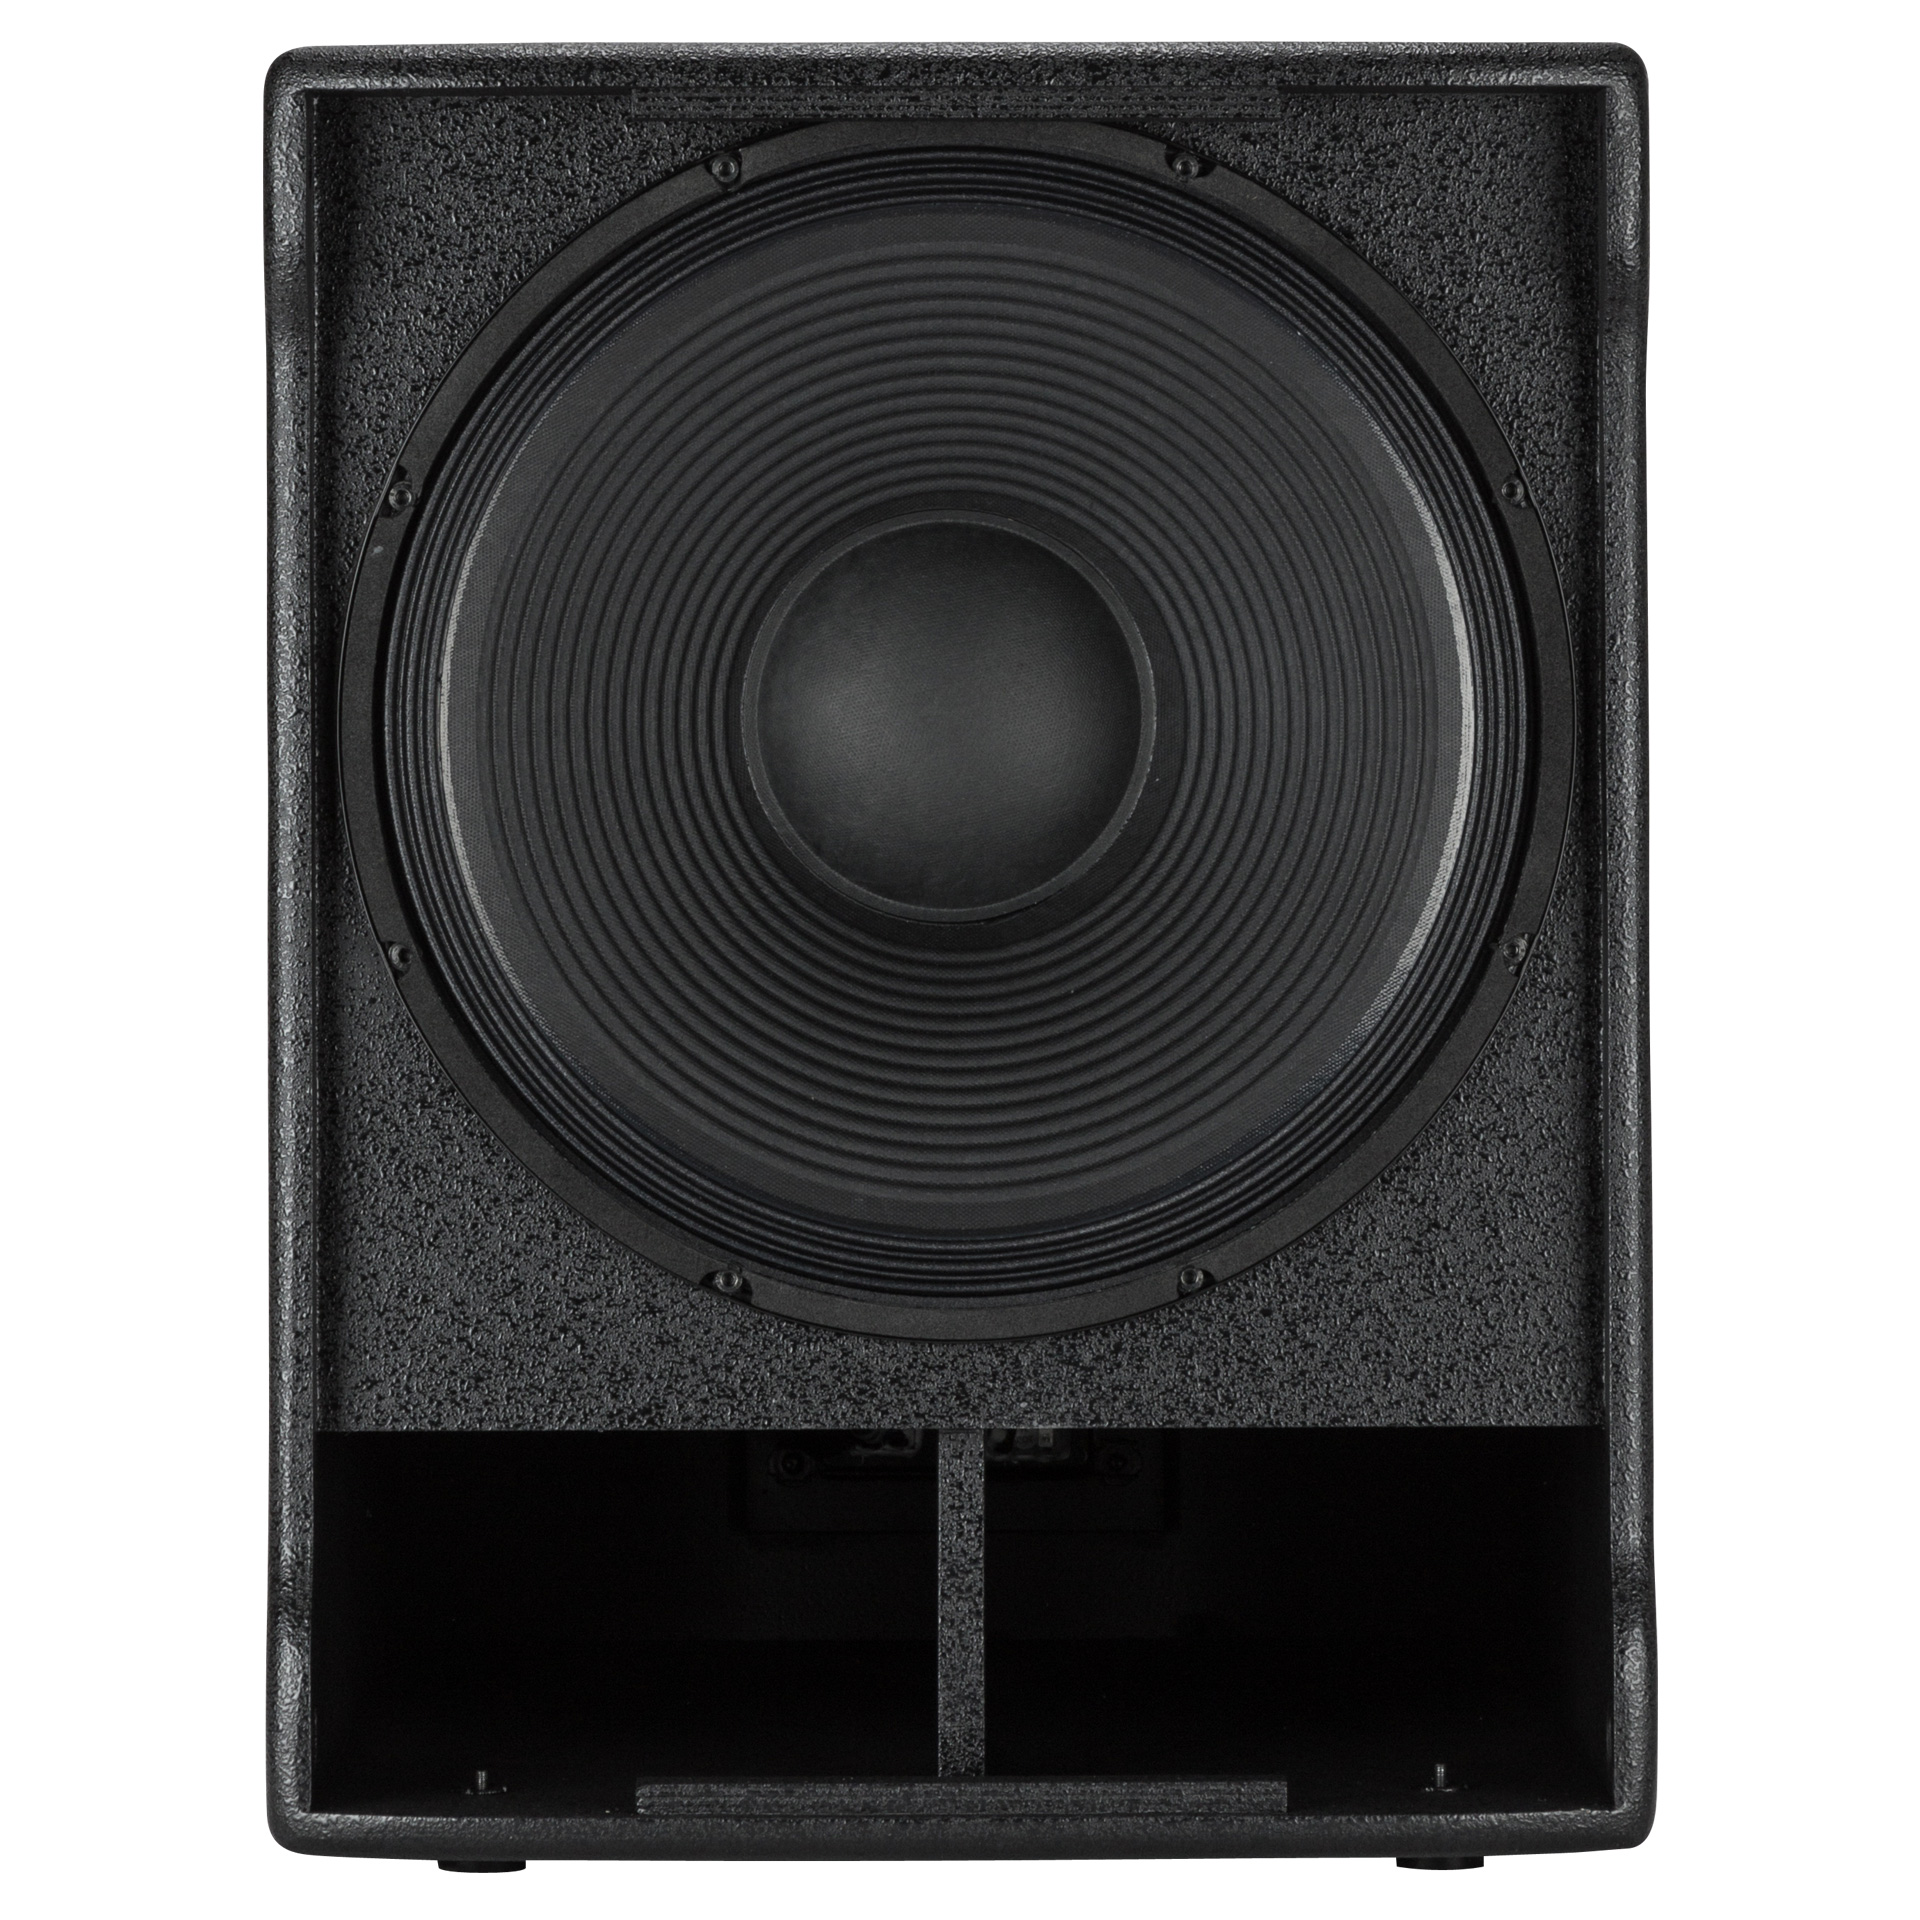 Rcf Sub 705-as Ii - Active subwoofer - Variation 2